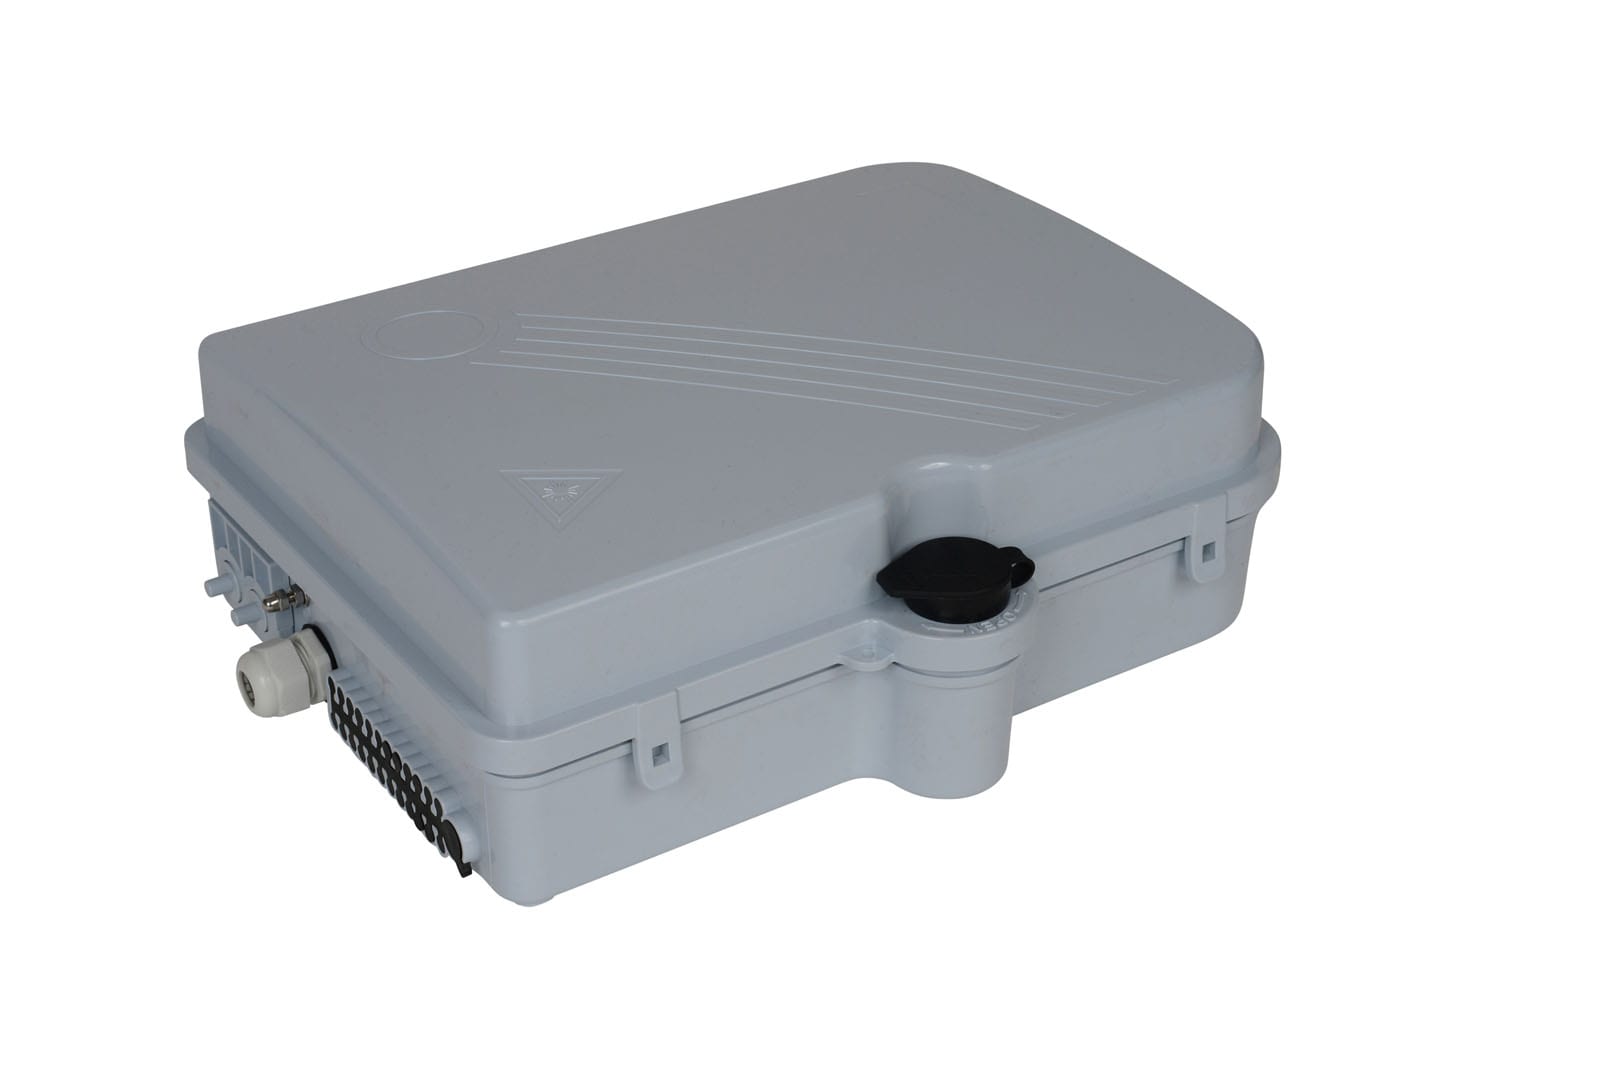 At a great price, the Fiber optics boxes are a great solution